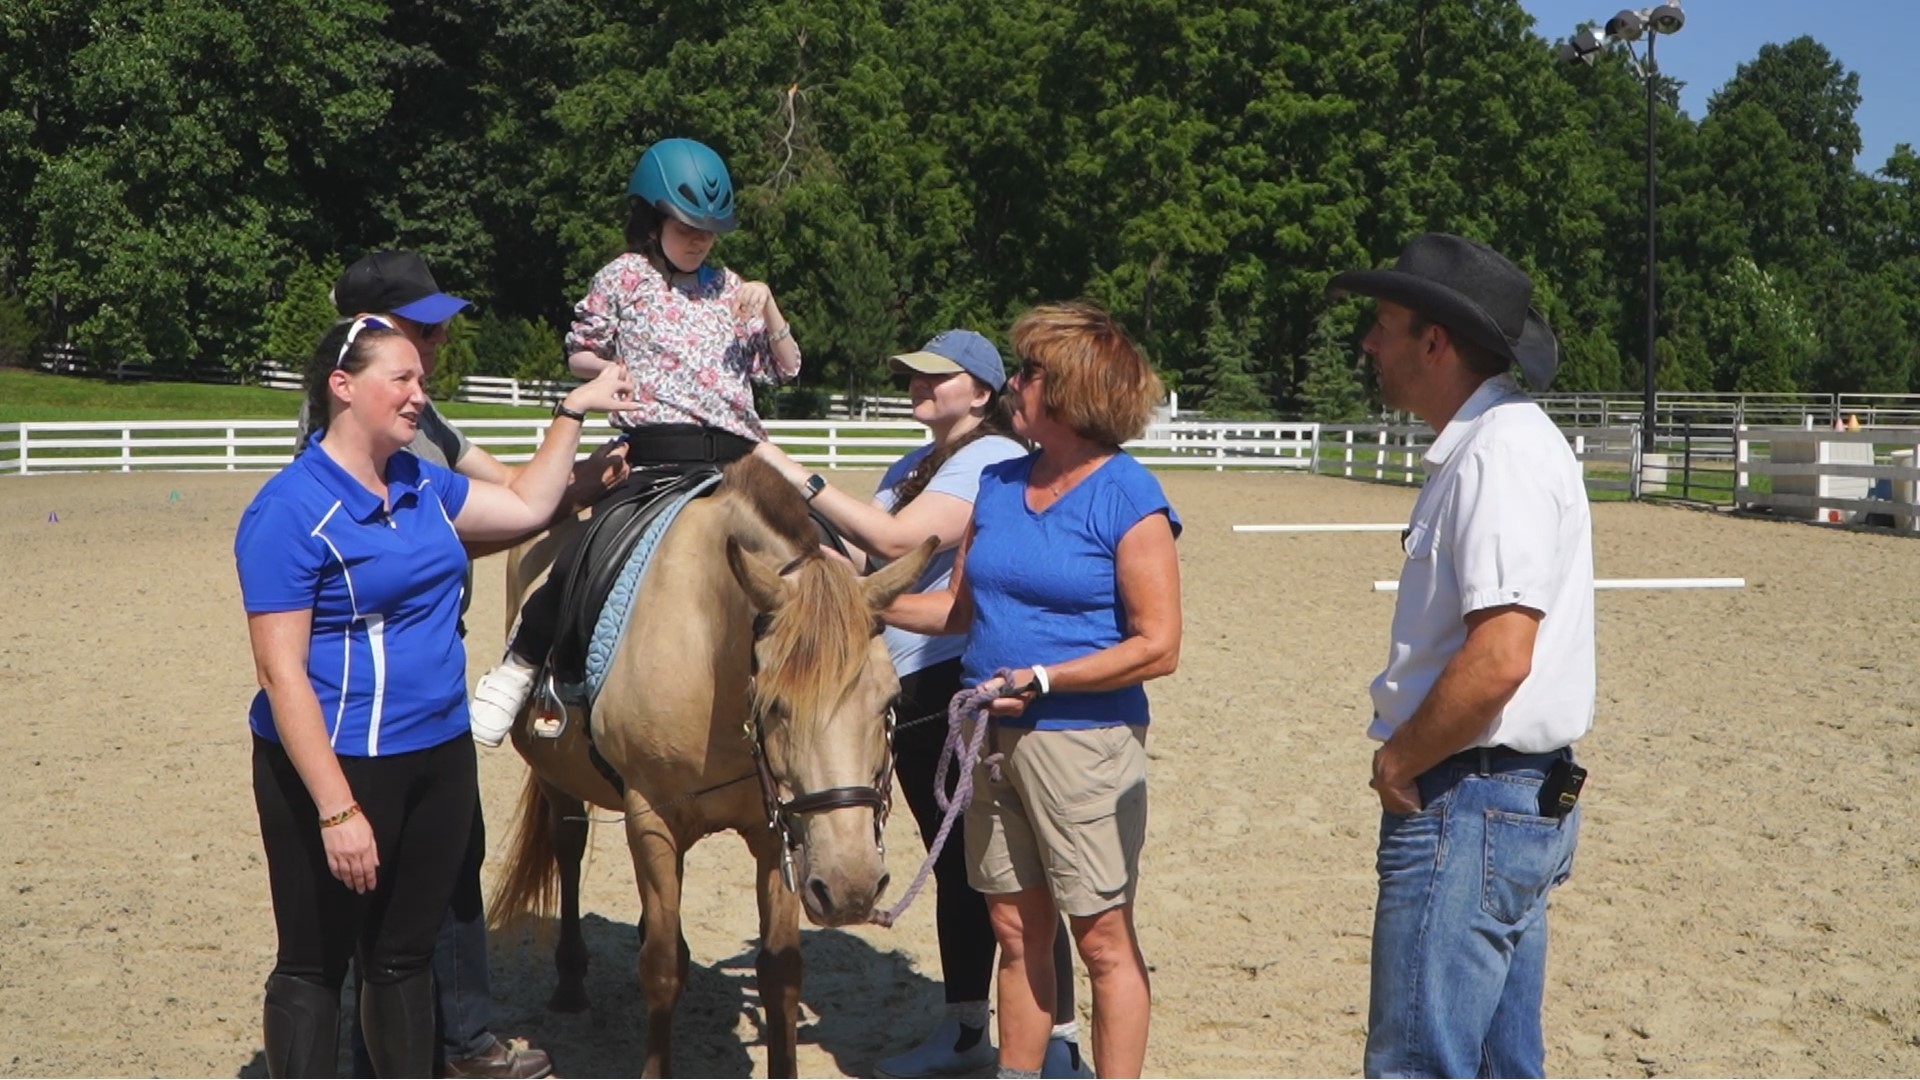 A farm in Clifton, Virginia is using horseback riding as a form of therapy.